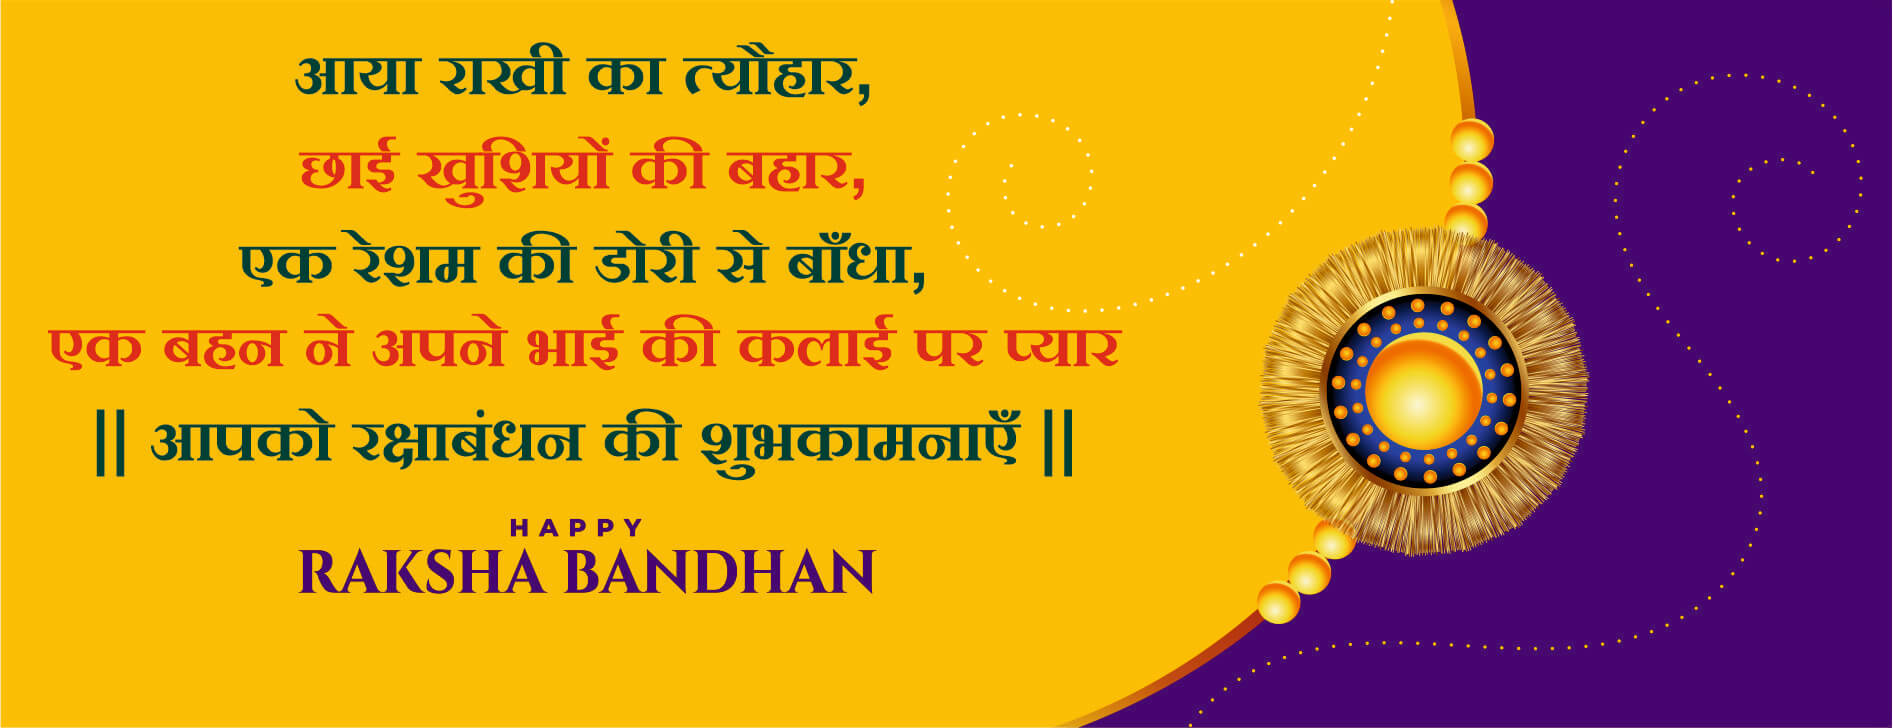 raksha bandhan quotes for brother in hindi with images